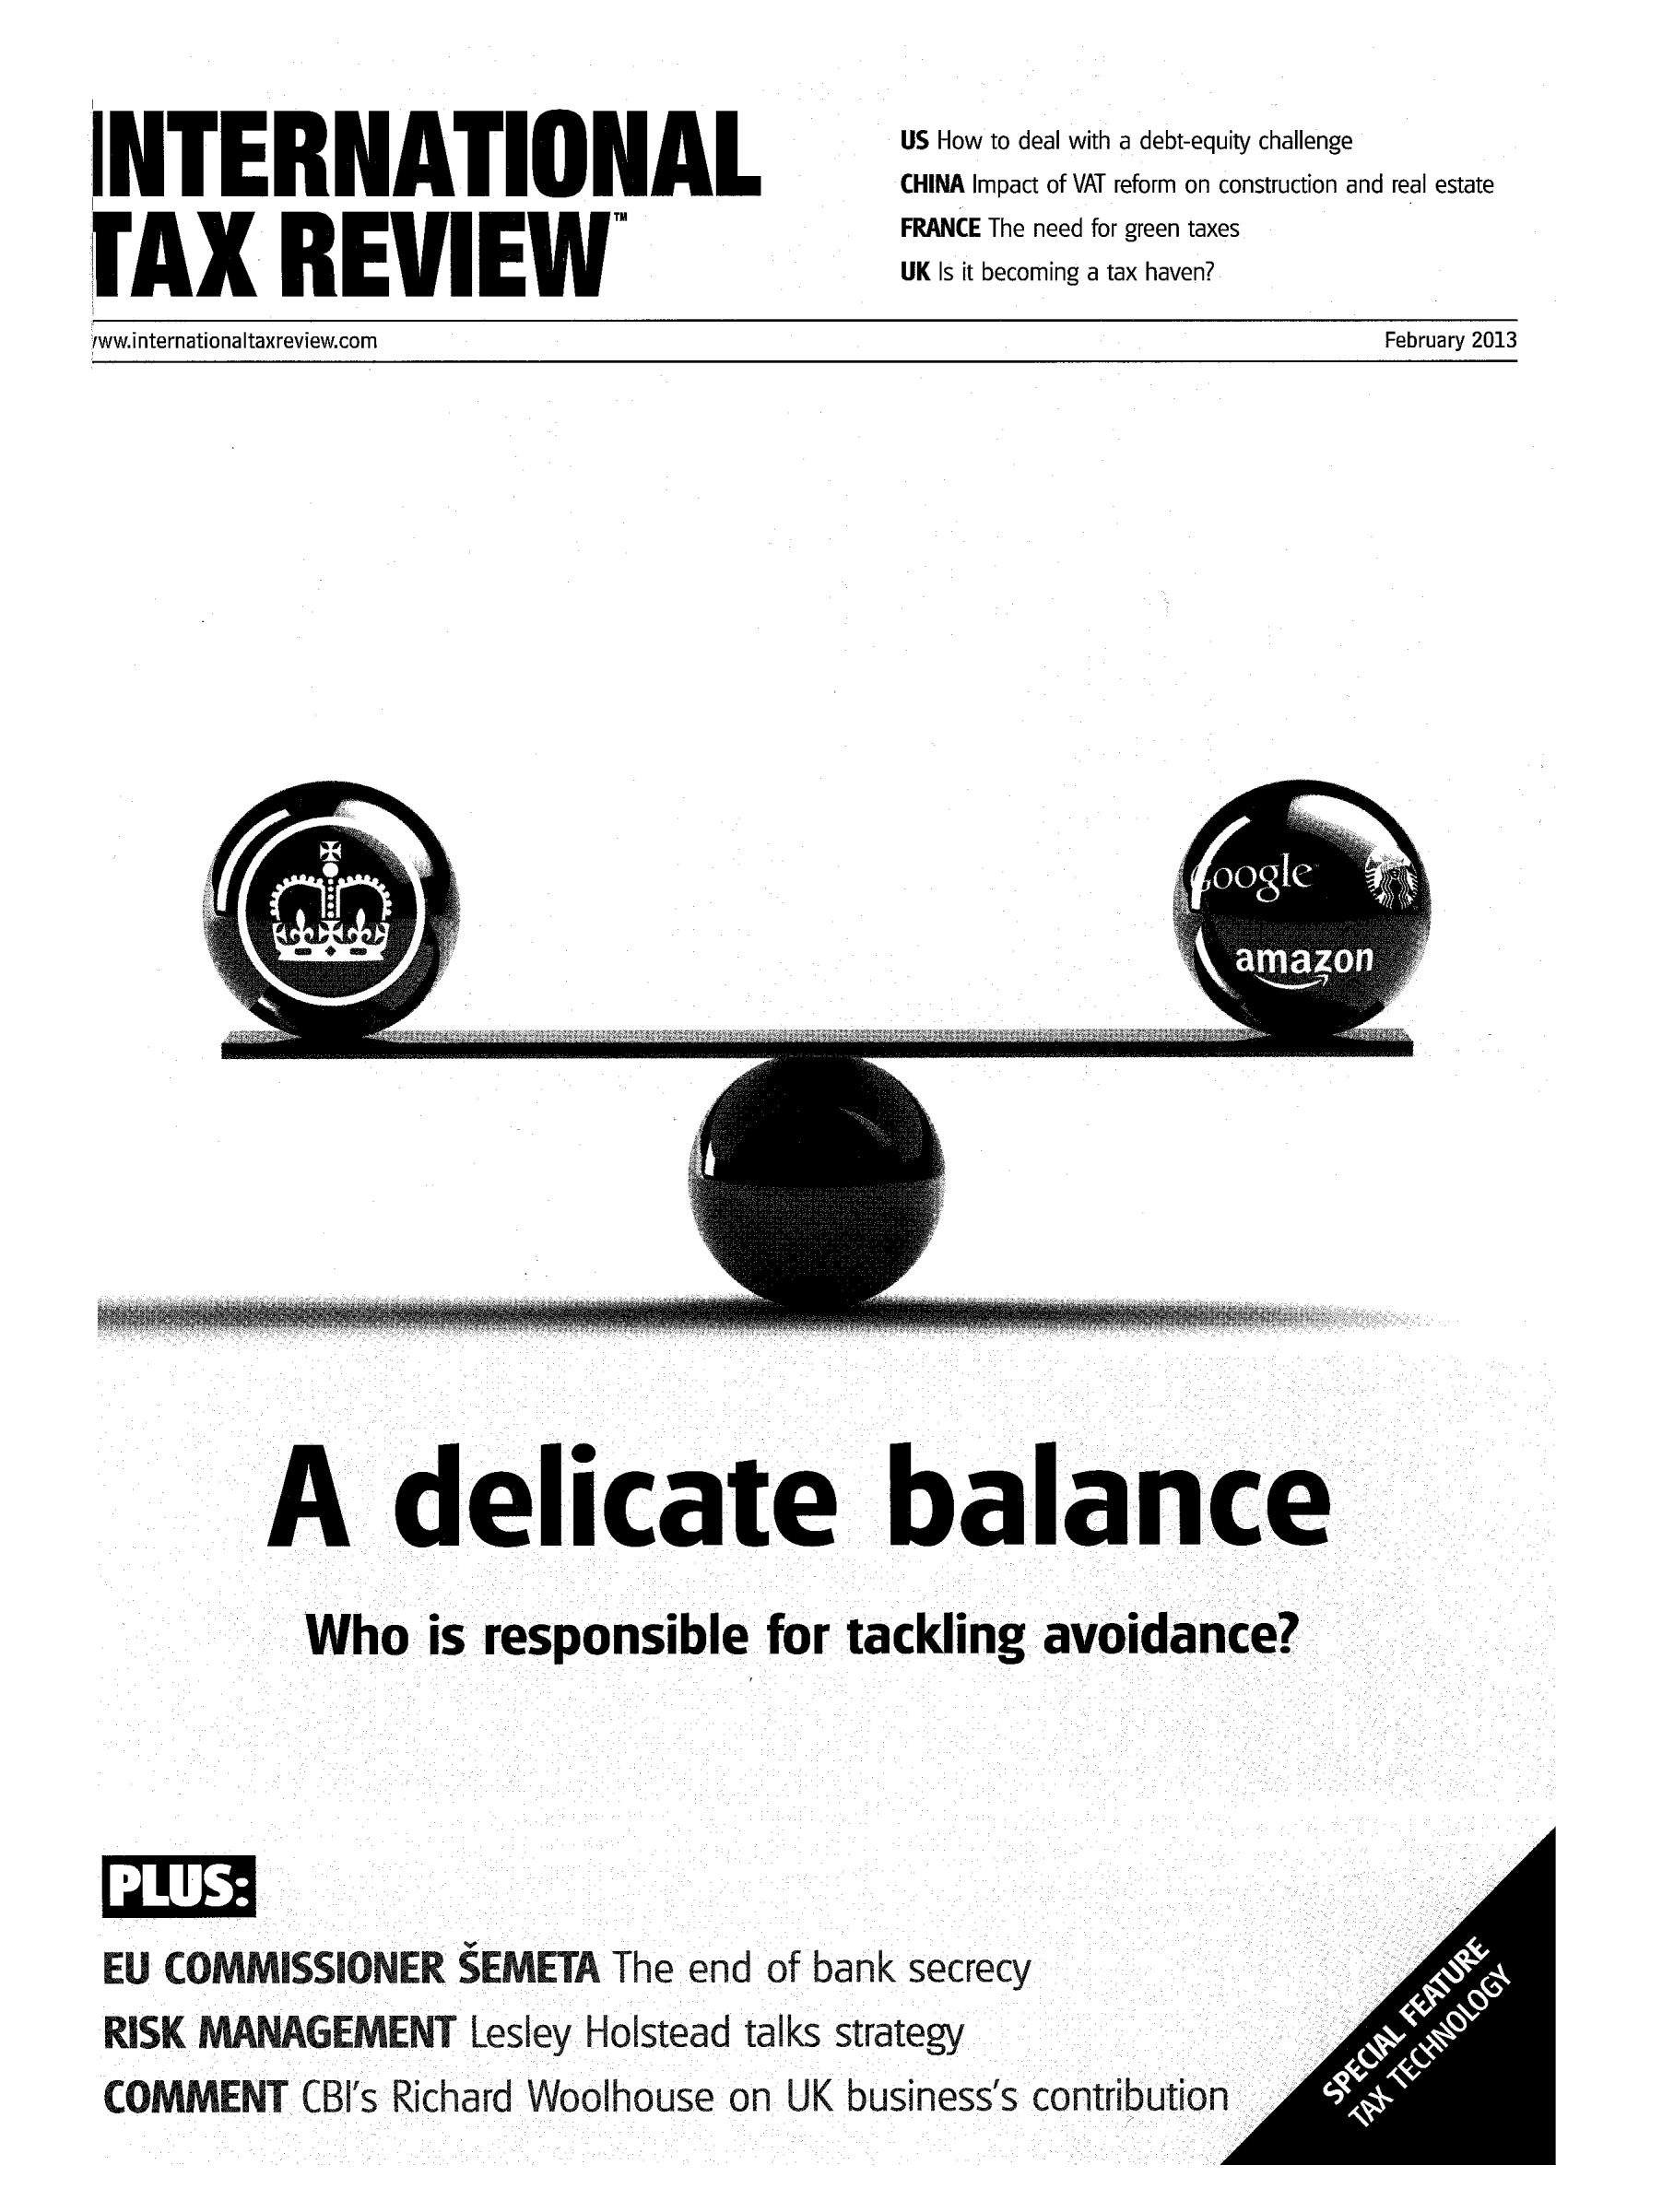 handle is hein.journals/intaxr24 and id is 1 raw text is: INTERNATIONAL
F AX REVIEW
,ww.internationaltaxreview.com

US How to deal with a debt-equity challenge
CHINA Impact of VAT reform on construction and real estate
FRANCE The need for green taxes
UK Is it becoming a tax haven?

February 2013

(4

A delicate balance
Who is responsible for tackling avoidance
EU% COMMISSIONER SEMETA The end of bank secrecy
RISK MANAGEMENT Lesley Holstead talks strategy
COMMENT CB's Richad Woolhouse on UK businesss contributi

N


